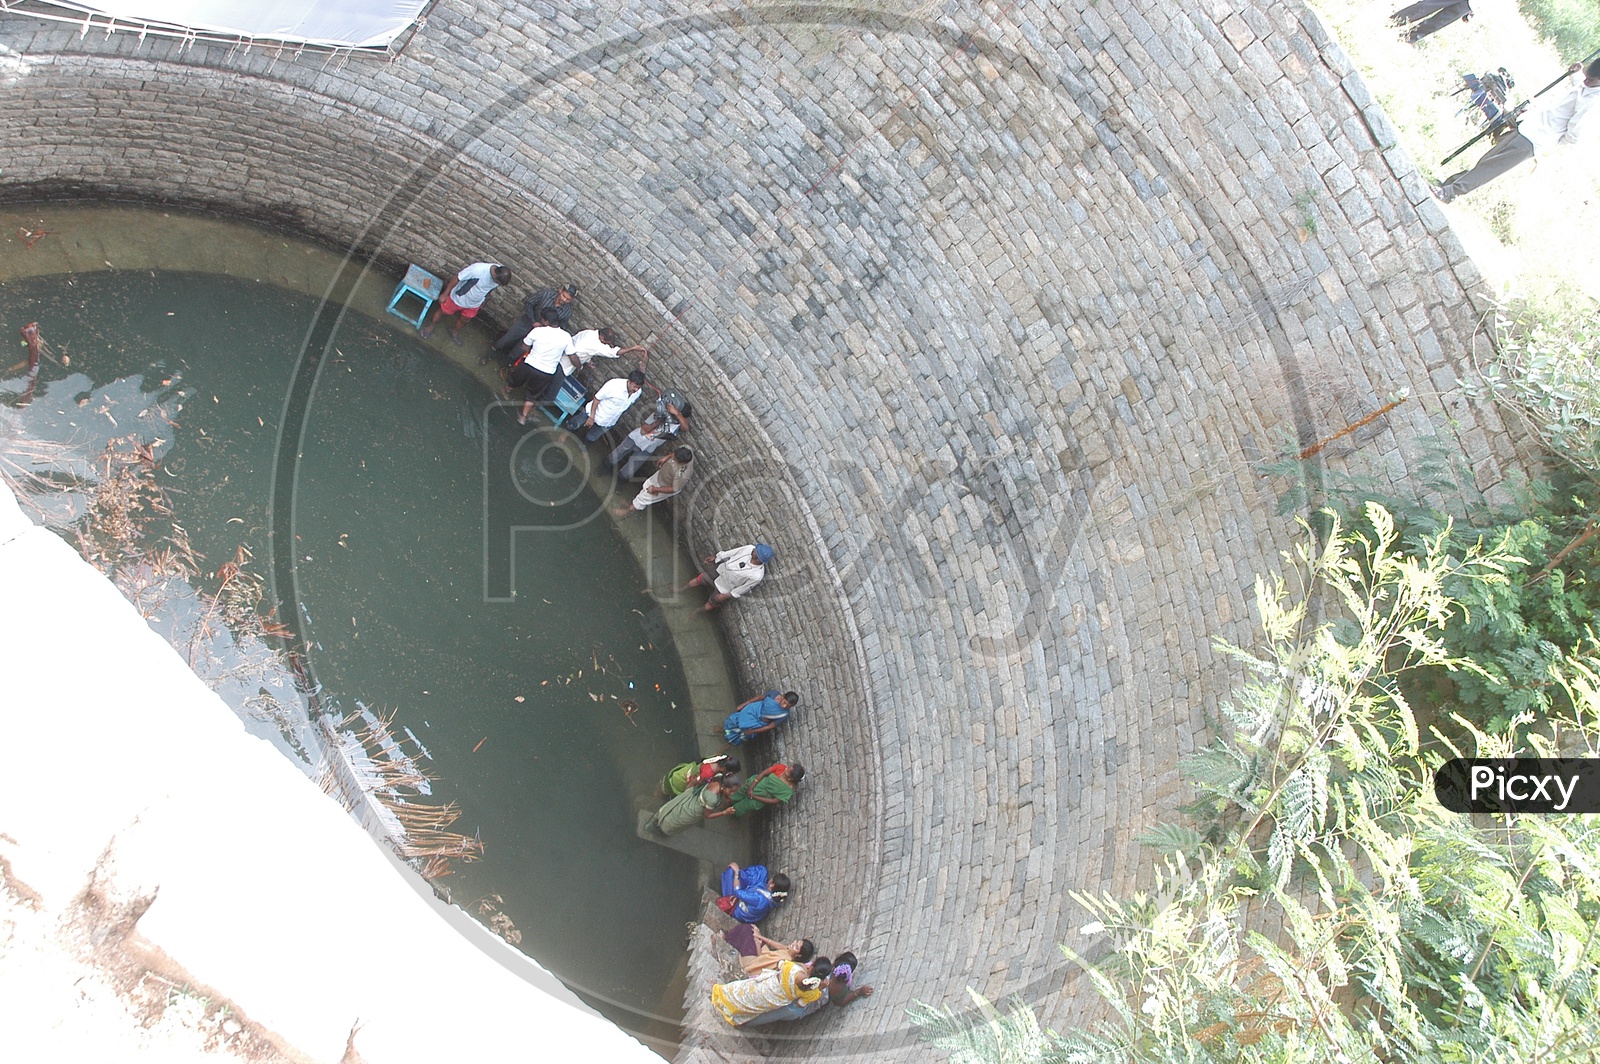 Telugu Movie Shooting in a Old Well